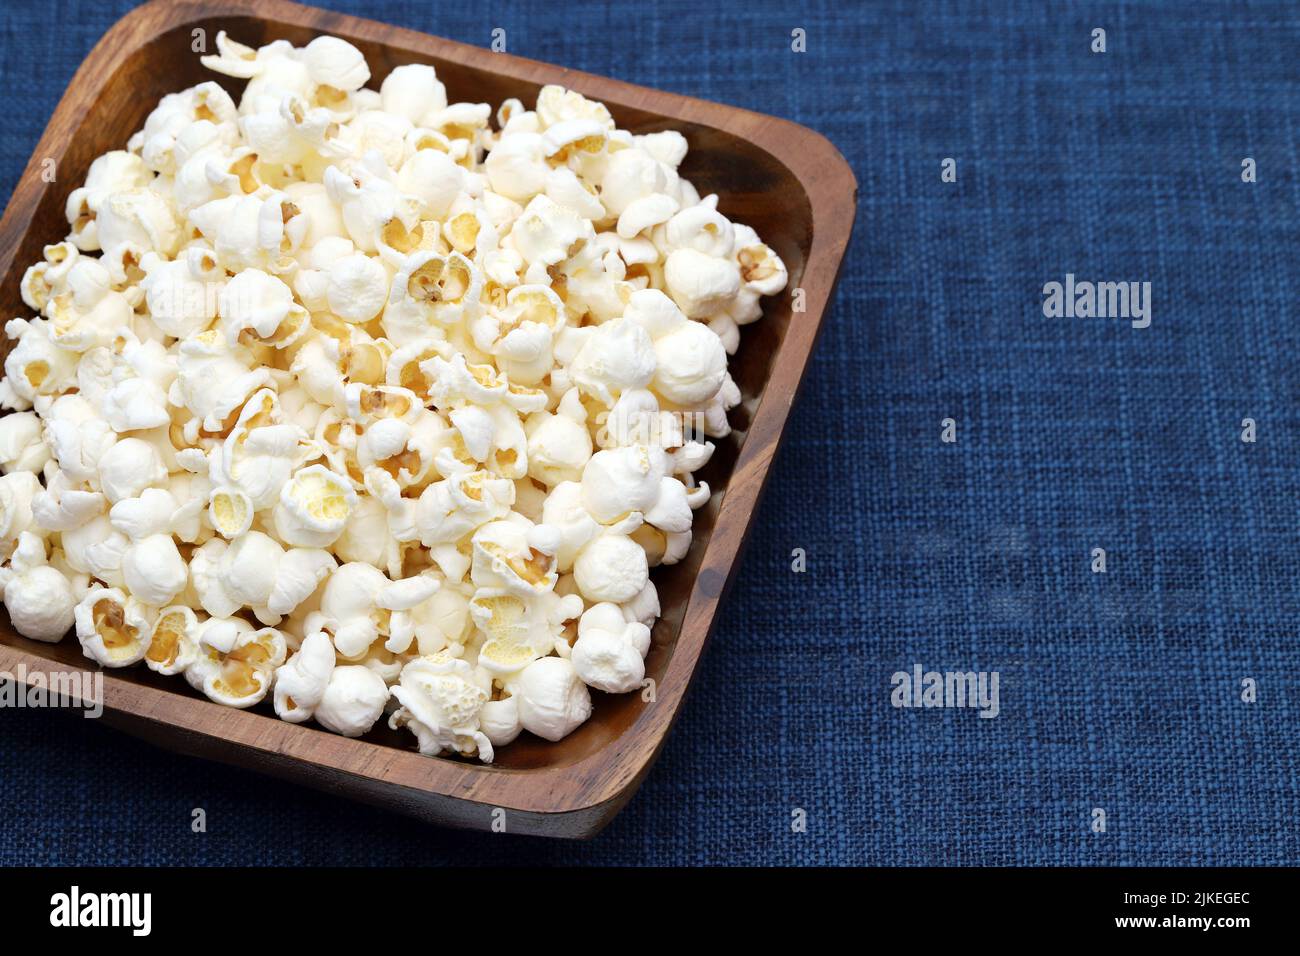 Popcorn in wooden bowl on table, Side view, Close up Stock Photo